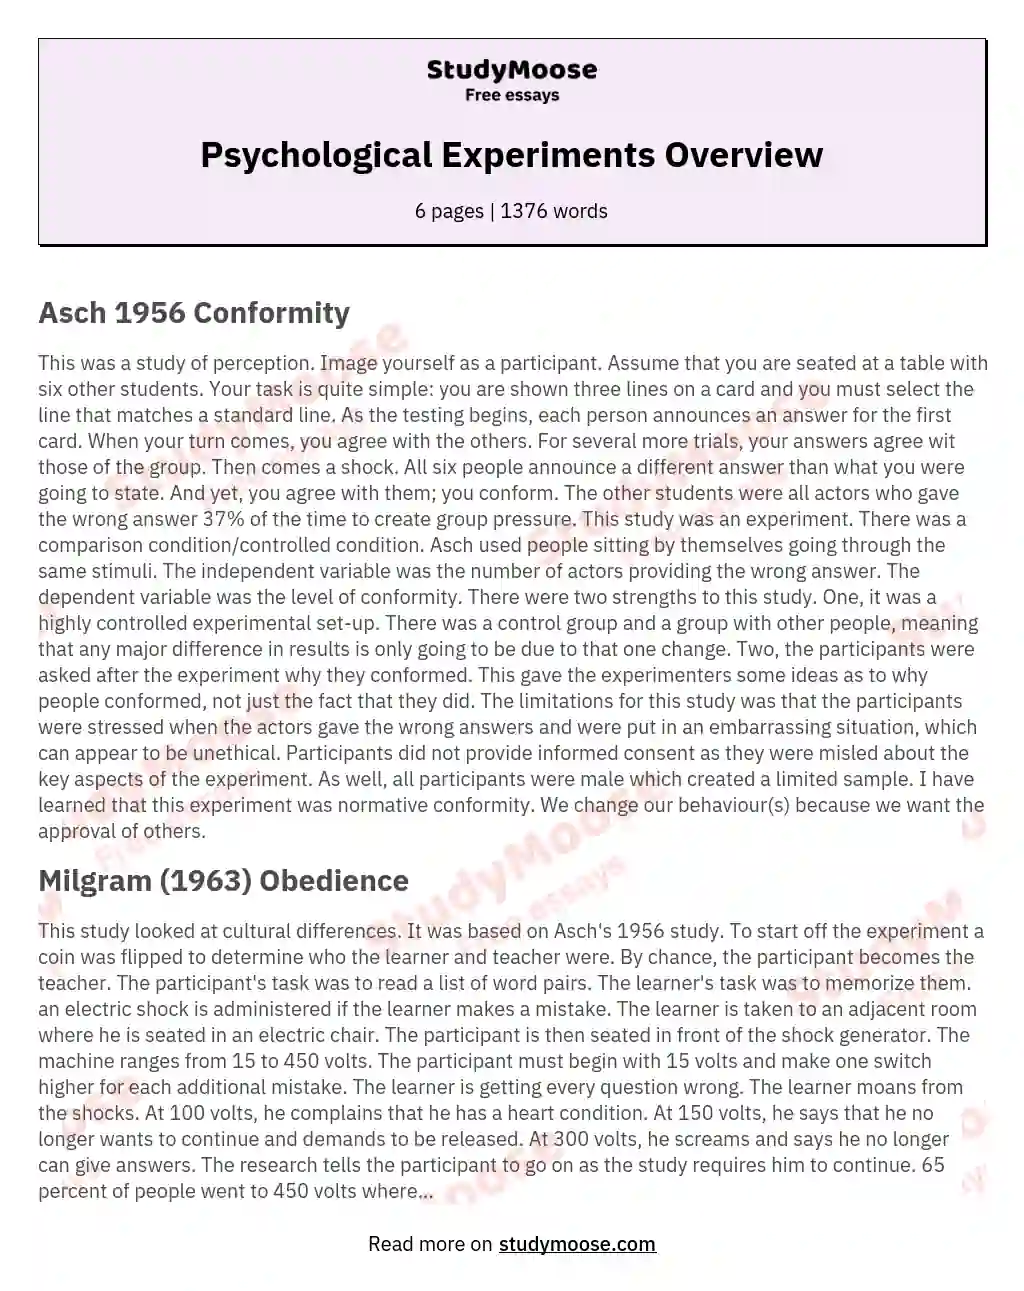 Psychological Experiments Overview essay